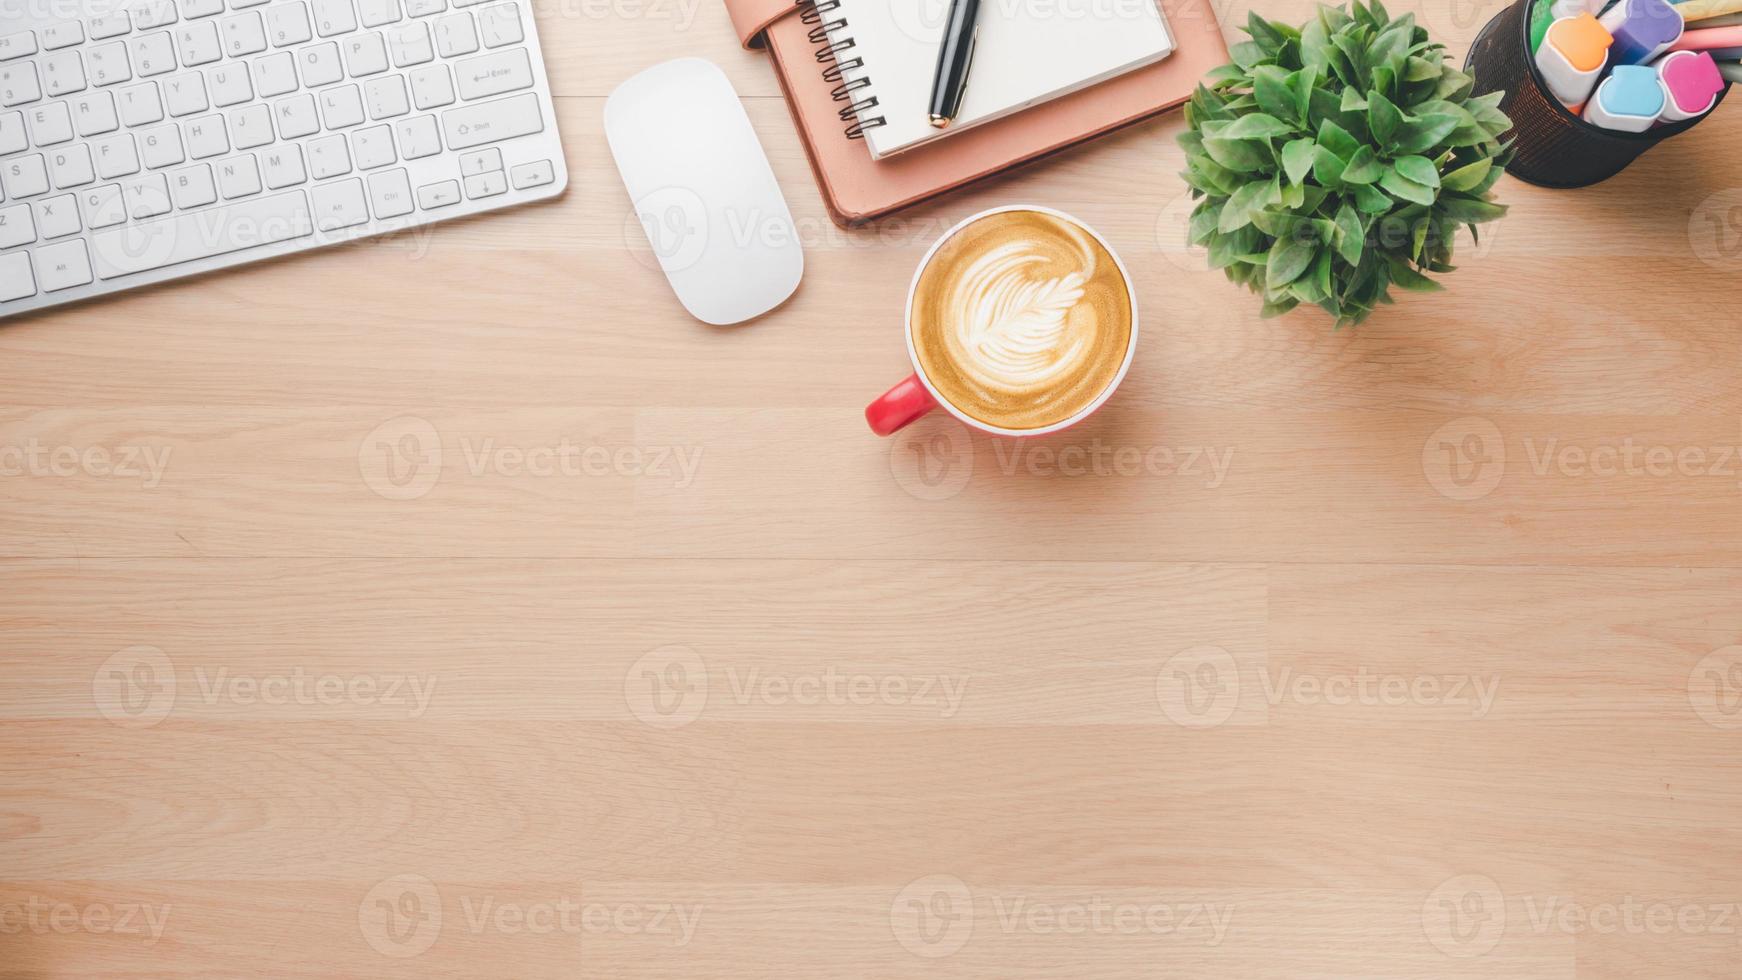 Office wooden desk workplace with keyboard, mouse, notebook, pen and cup of coffee, Top view flat lay with copy space. photo